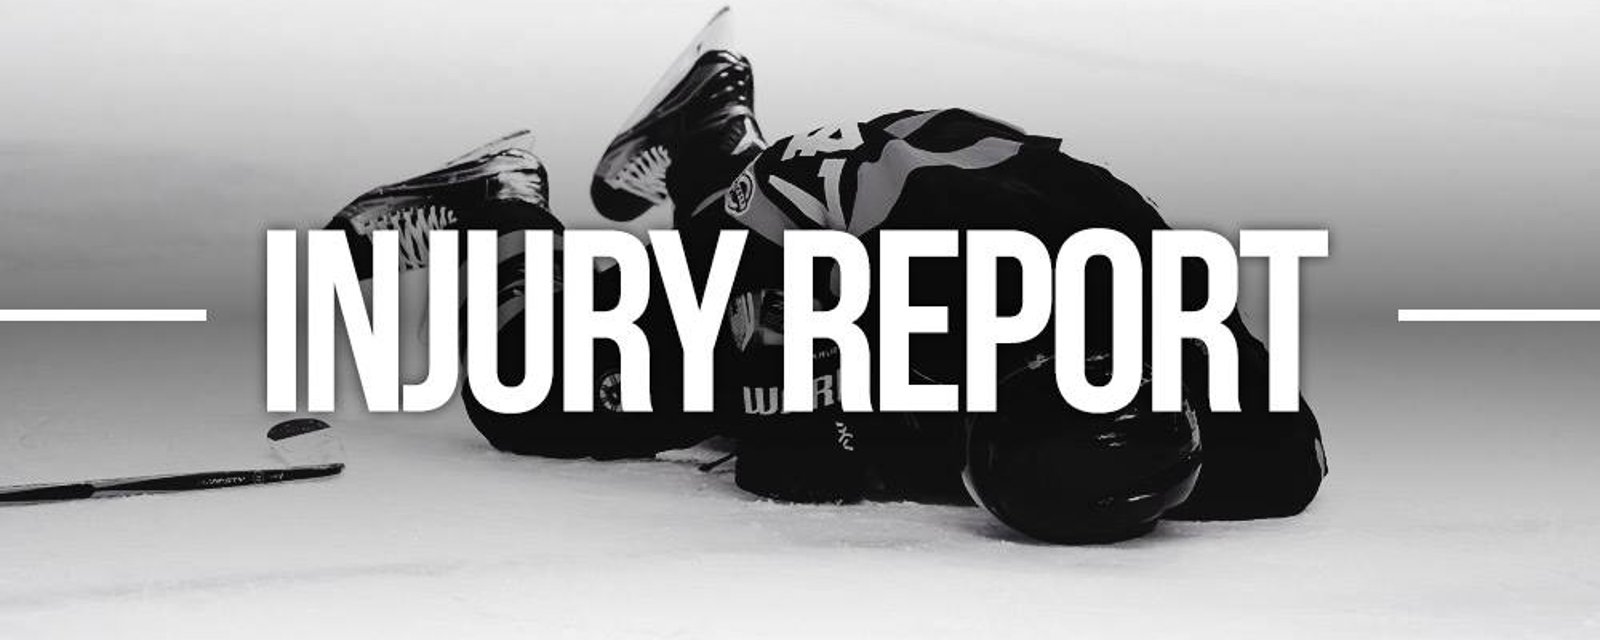 INJURY REPORT: NHL coach, gambling with the health of one of his core player?